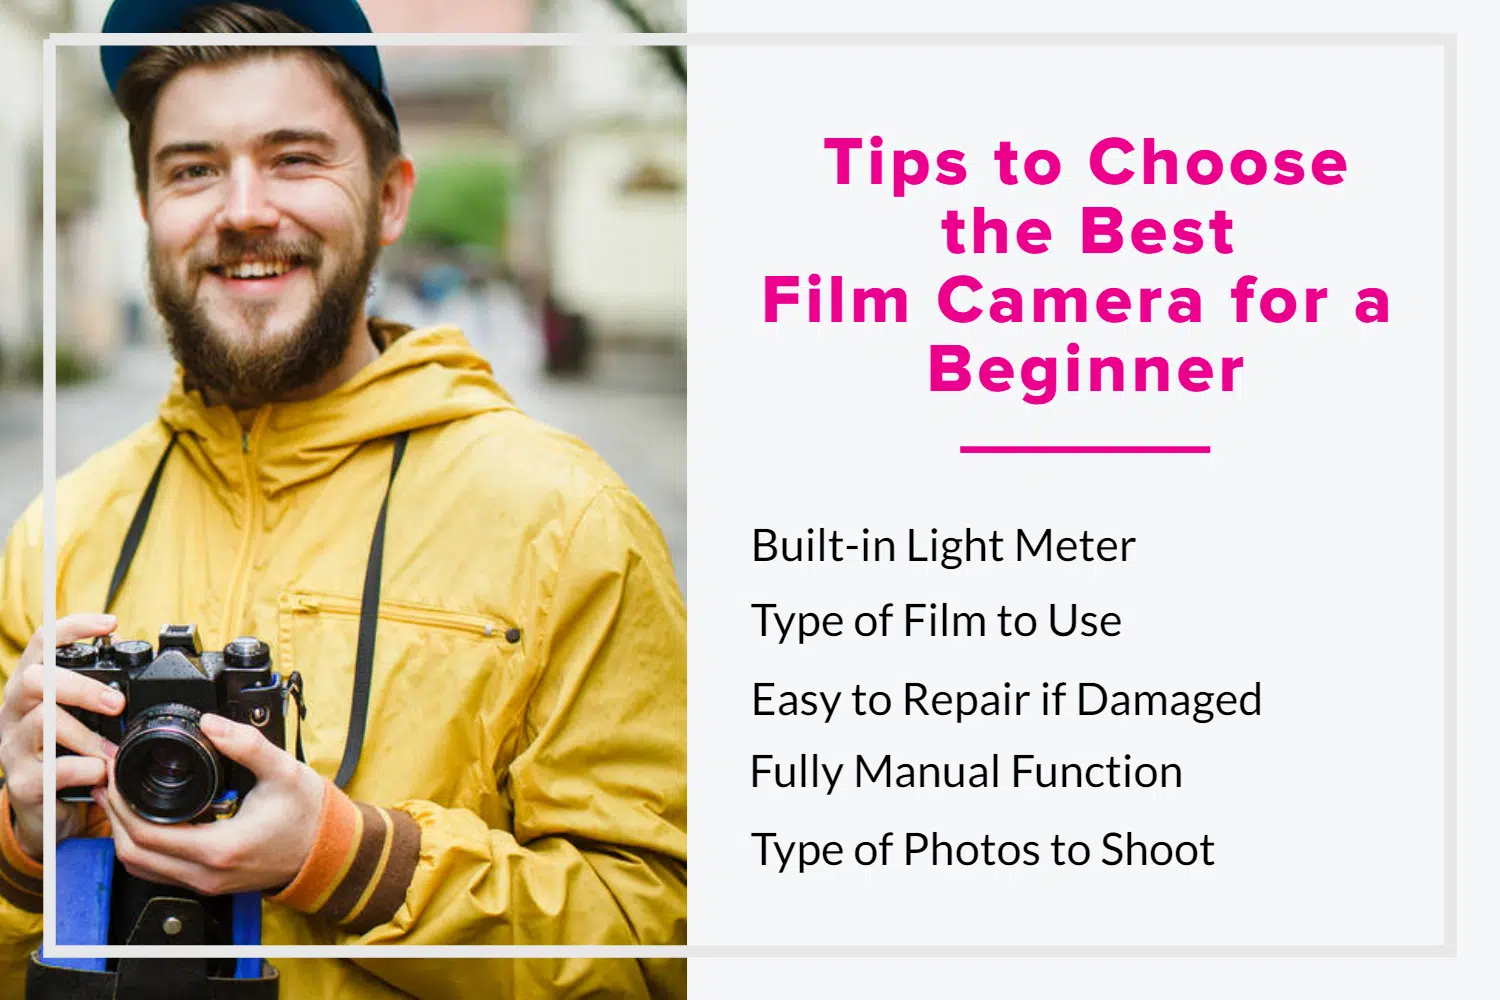 Tips to Choose the Best Film Camera for a Beginner